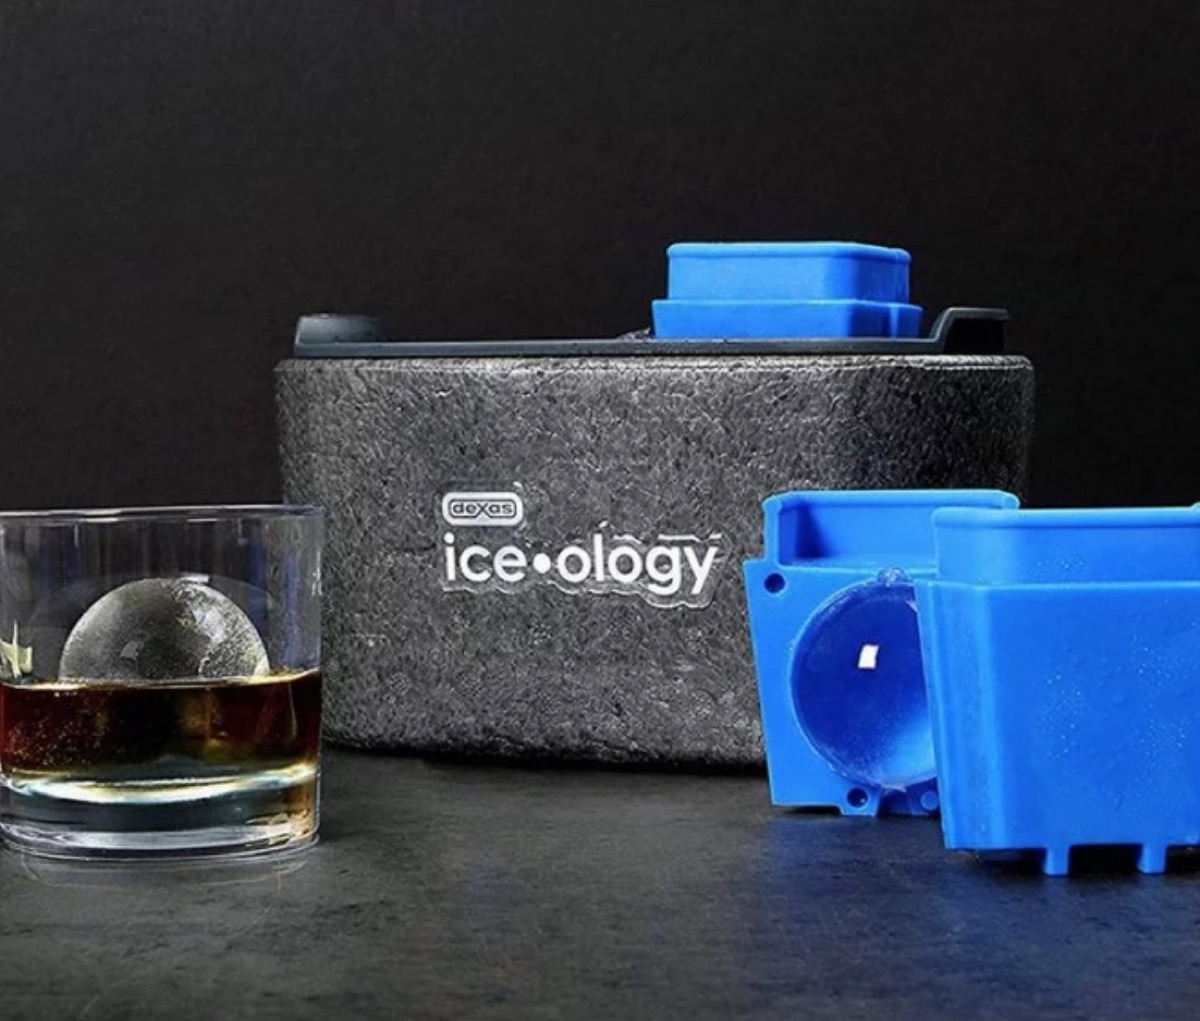 glass with whiskey and round ice cube next to blue ice cube mold